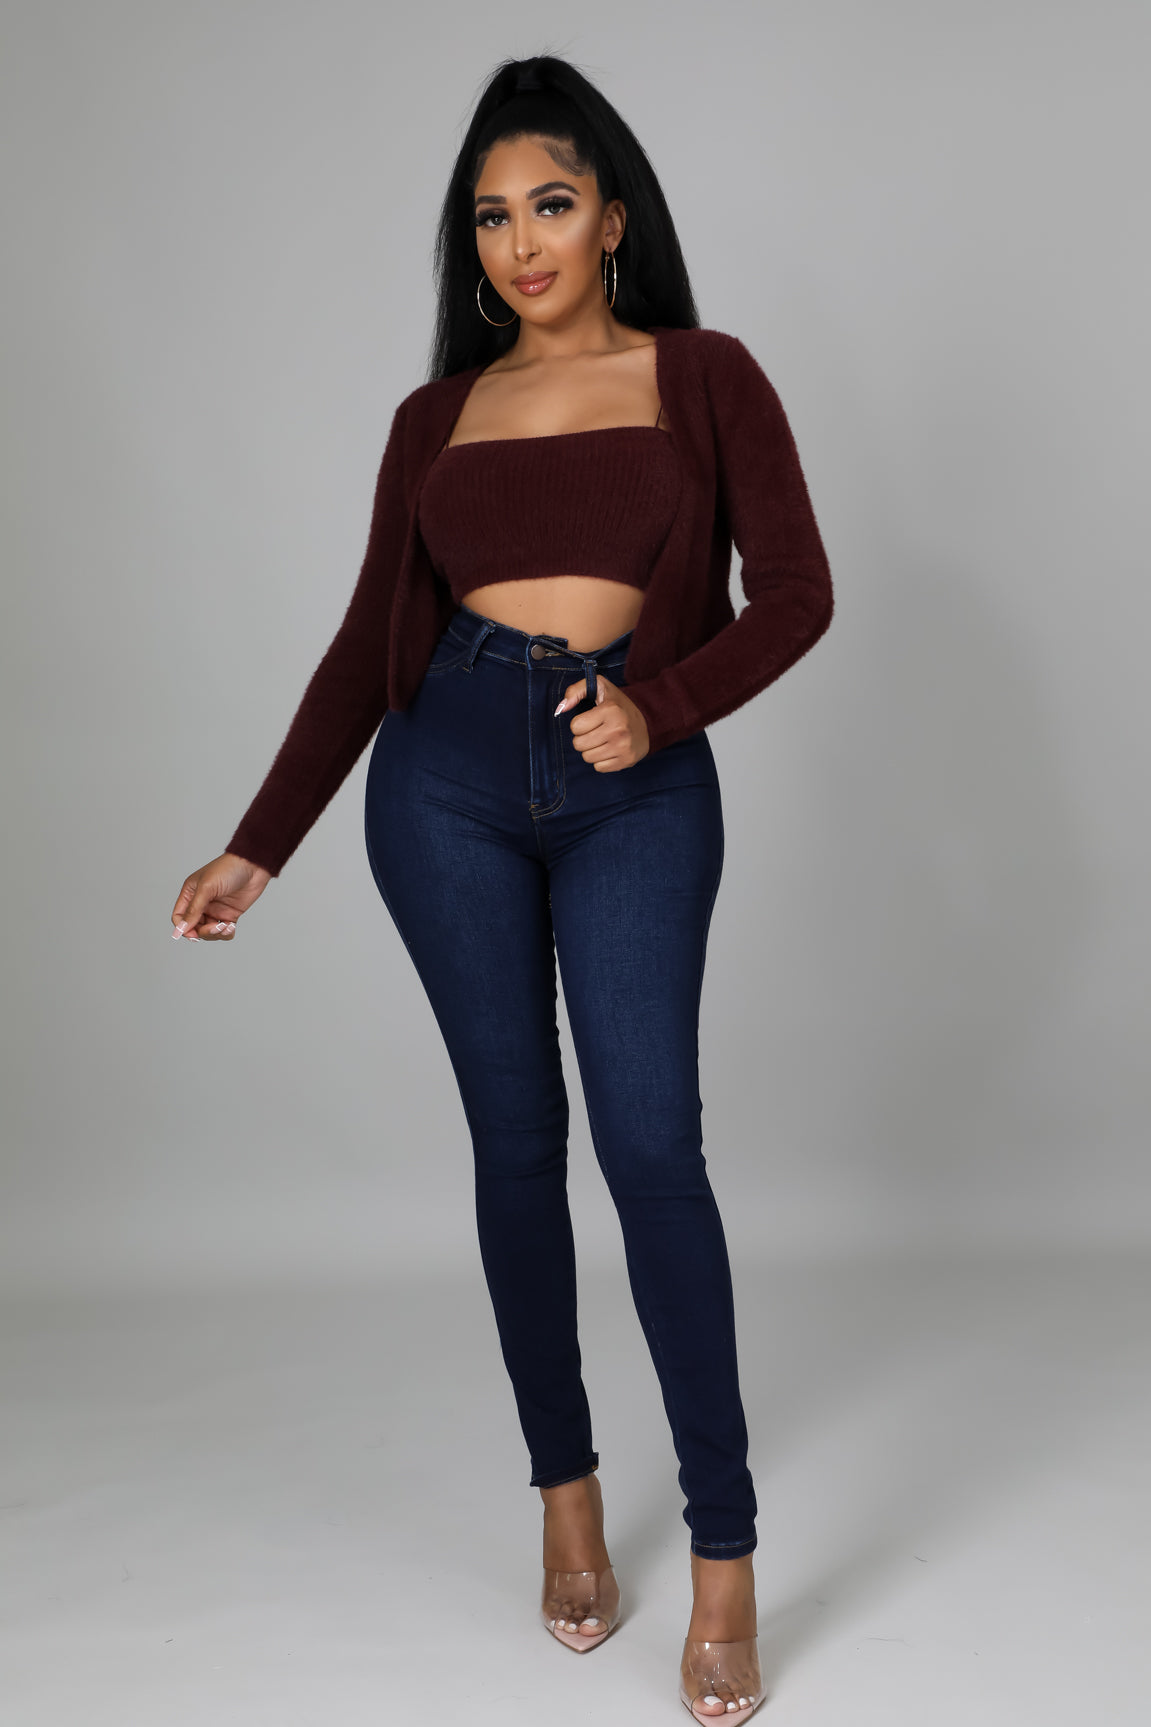 2pc Fall Fave Top